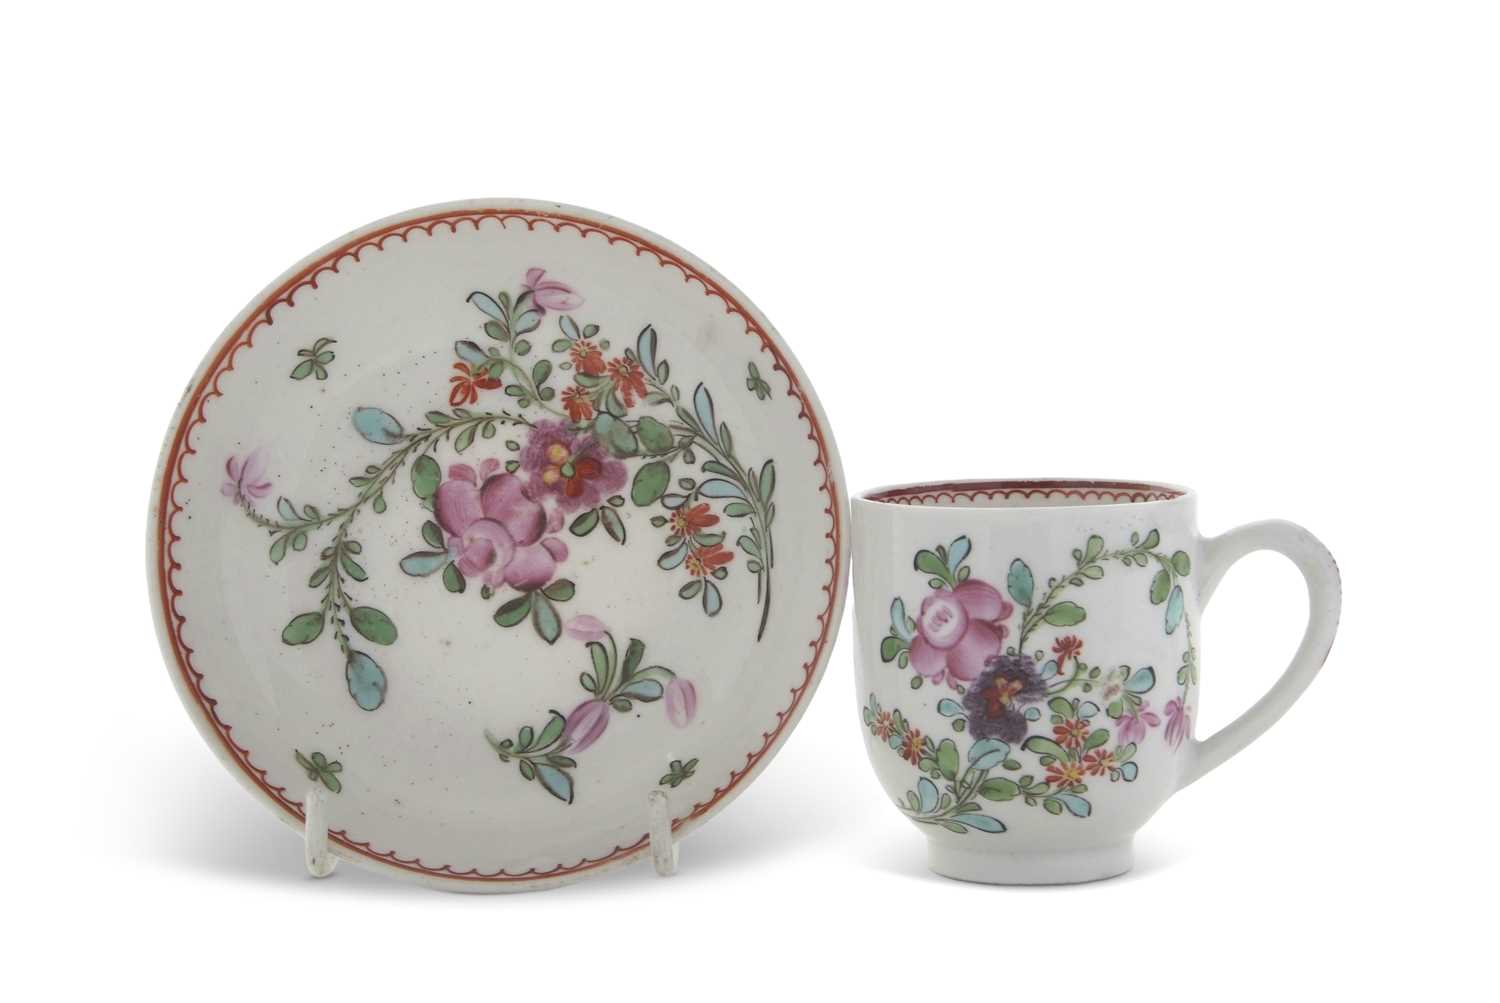 A Lowestoft porcelain cup and saucer circa 1770 with polychrome designs of flowers in Curtis